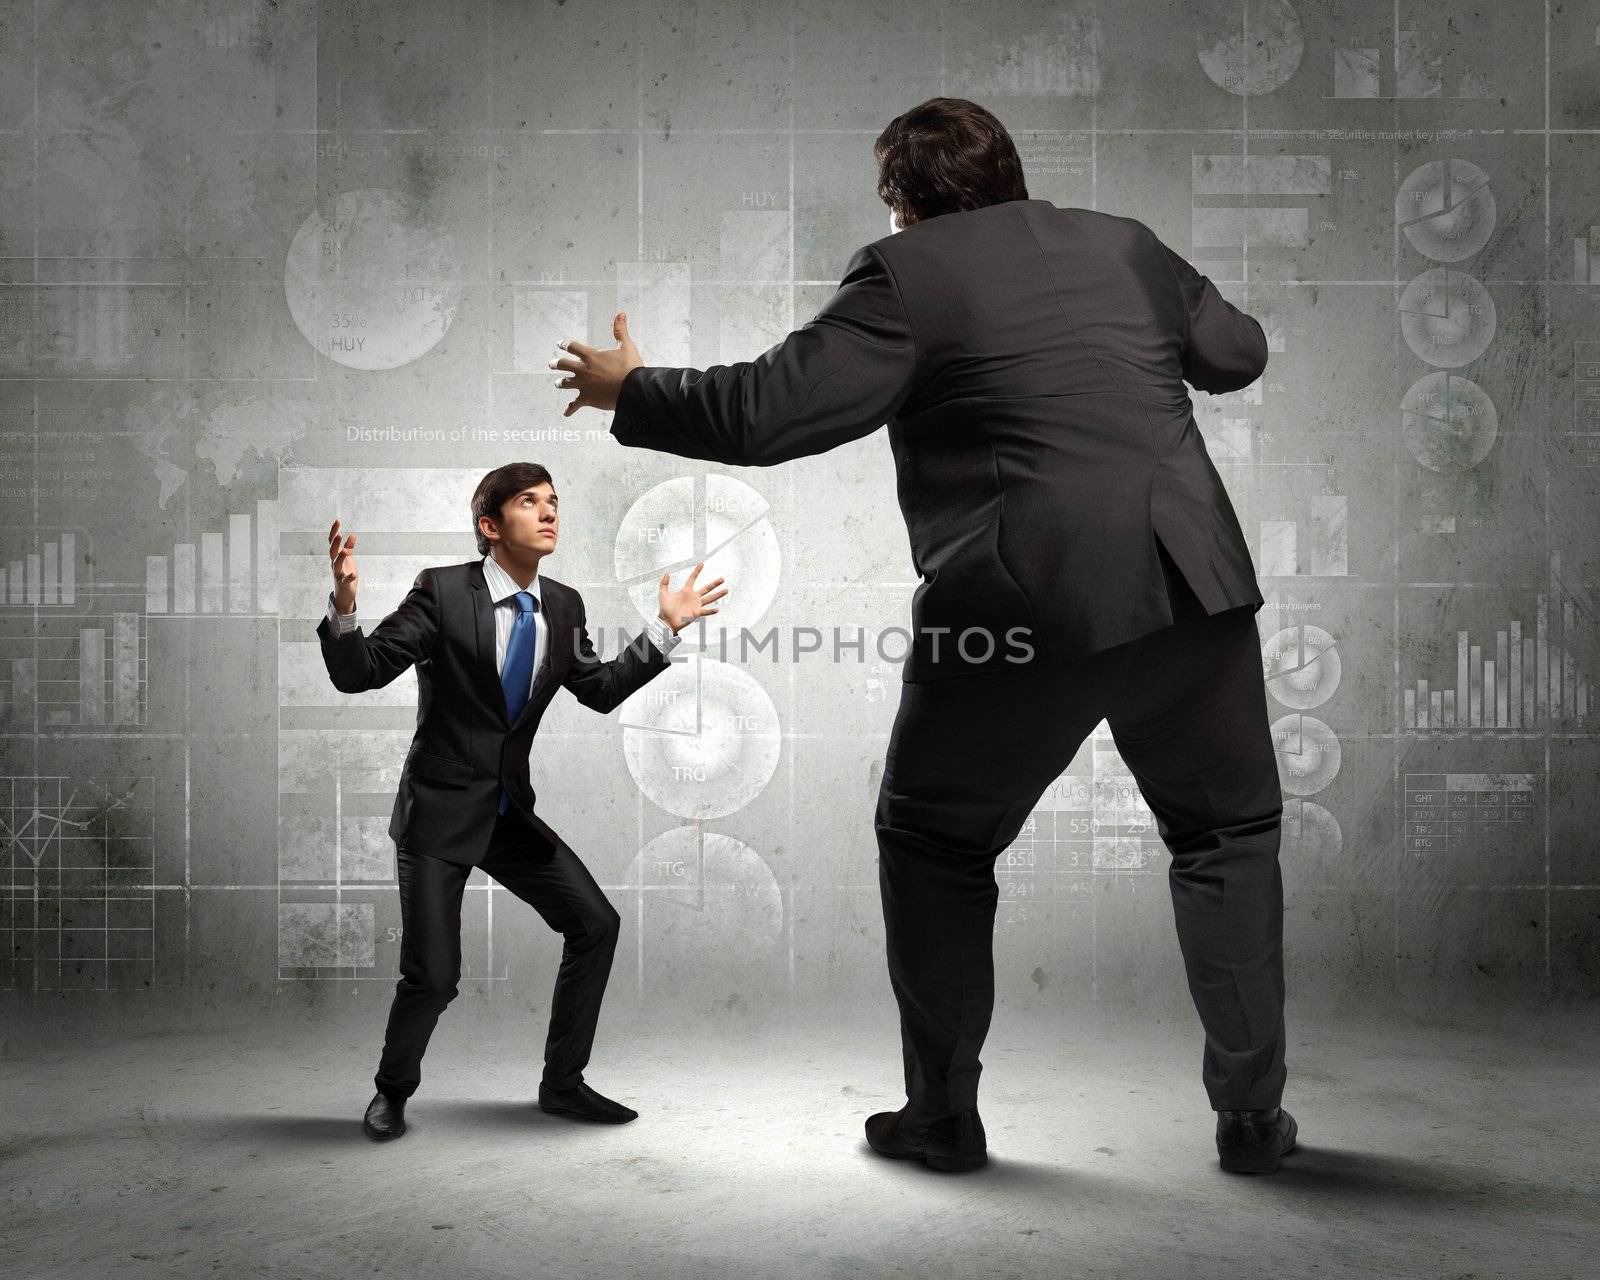 Image of businesspeople arguing and acting as sumo fighters against city background